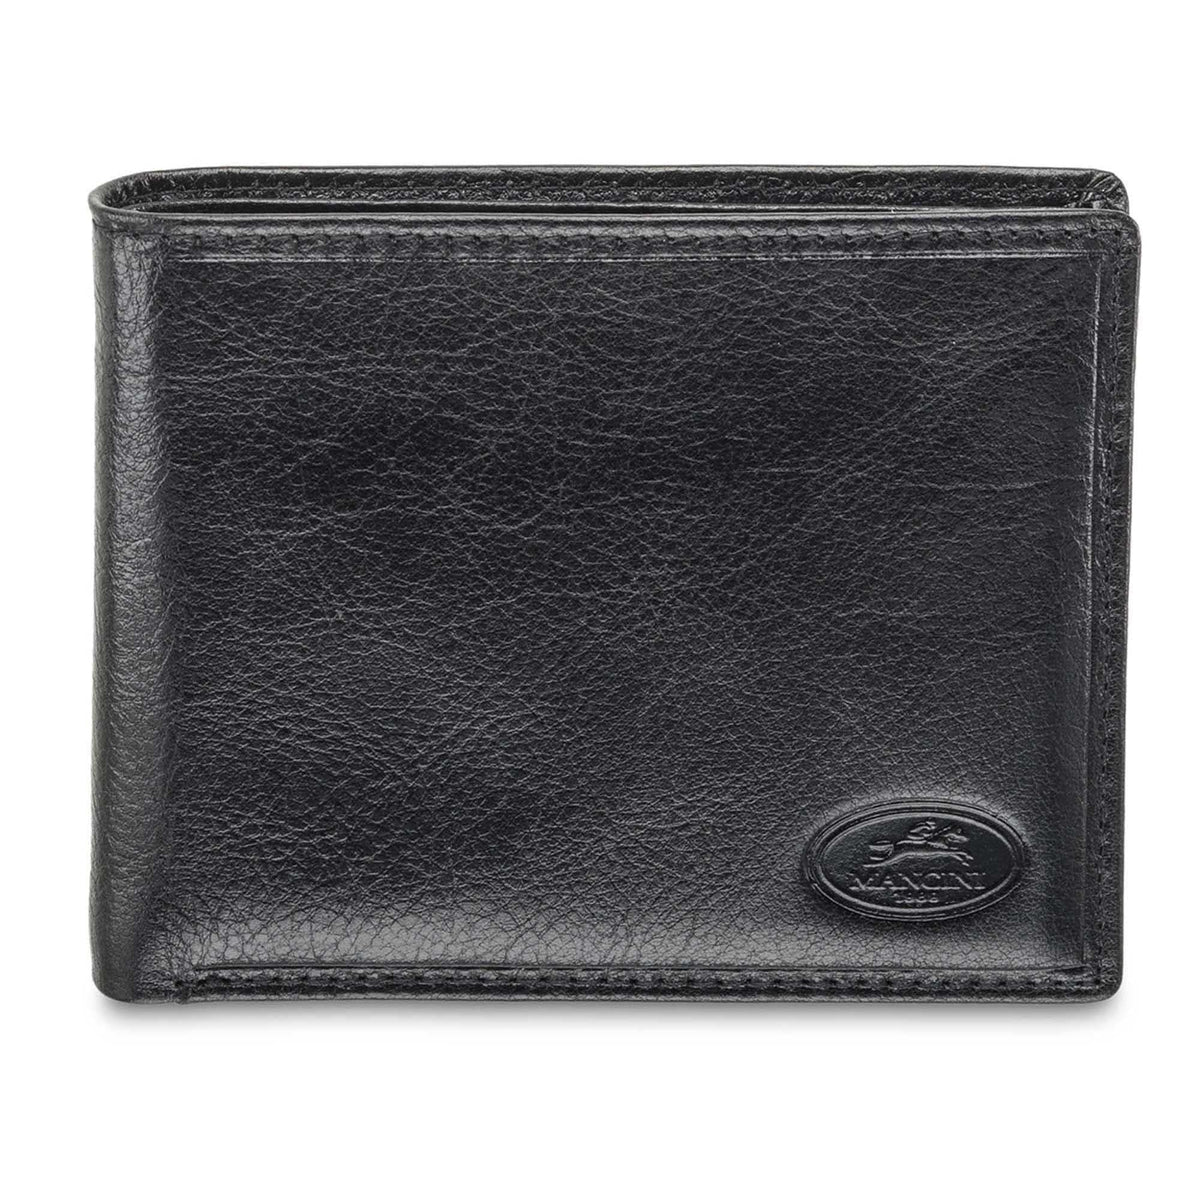 Mancini Equestrian-2 Men's RFID Secure Billfold with Removable Passcase